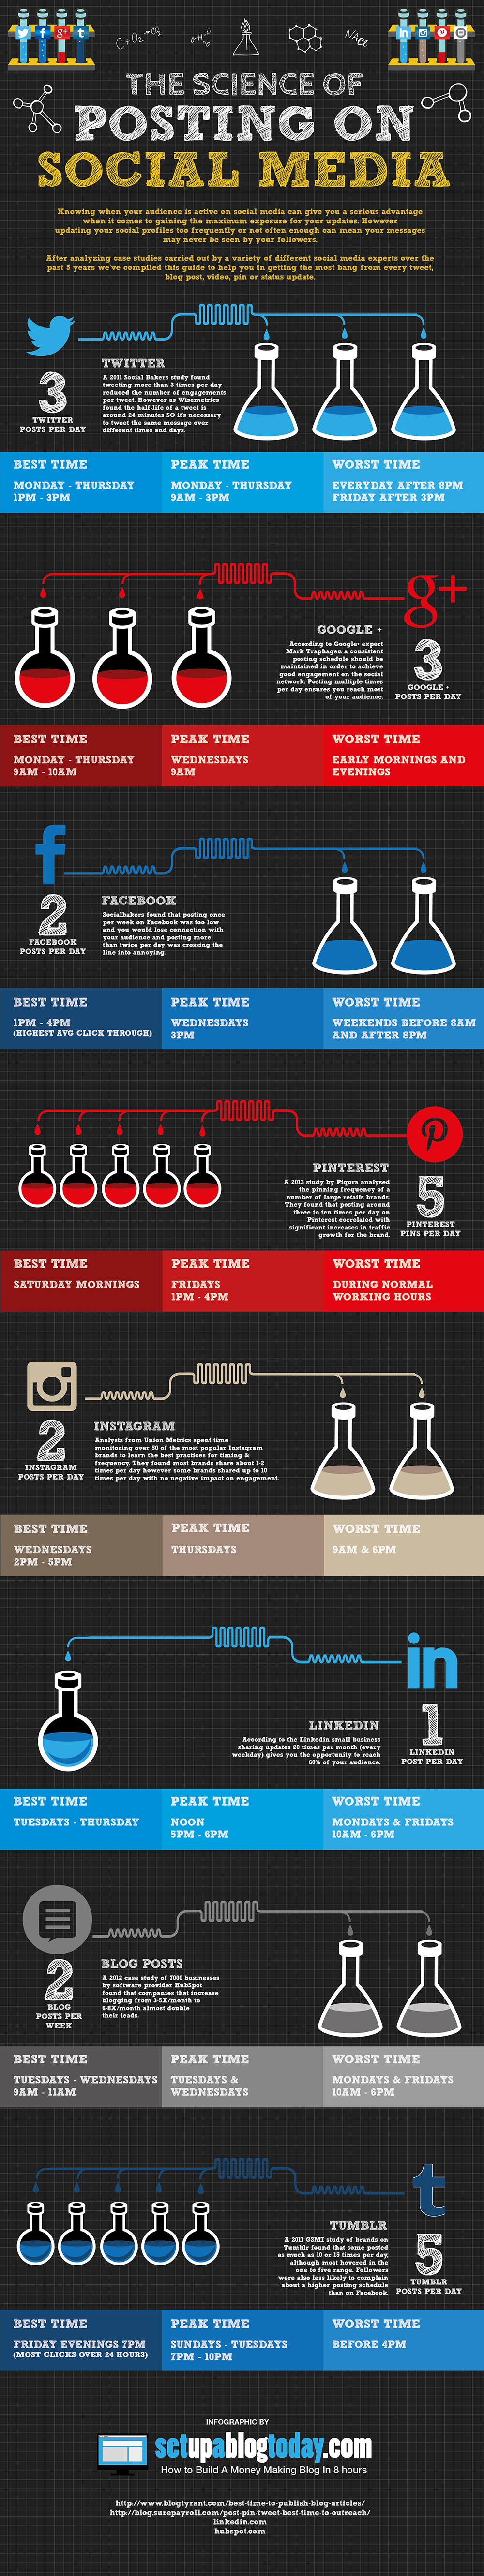 The Science of Posting On Social Media [Infographic]